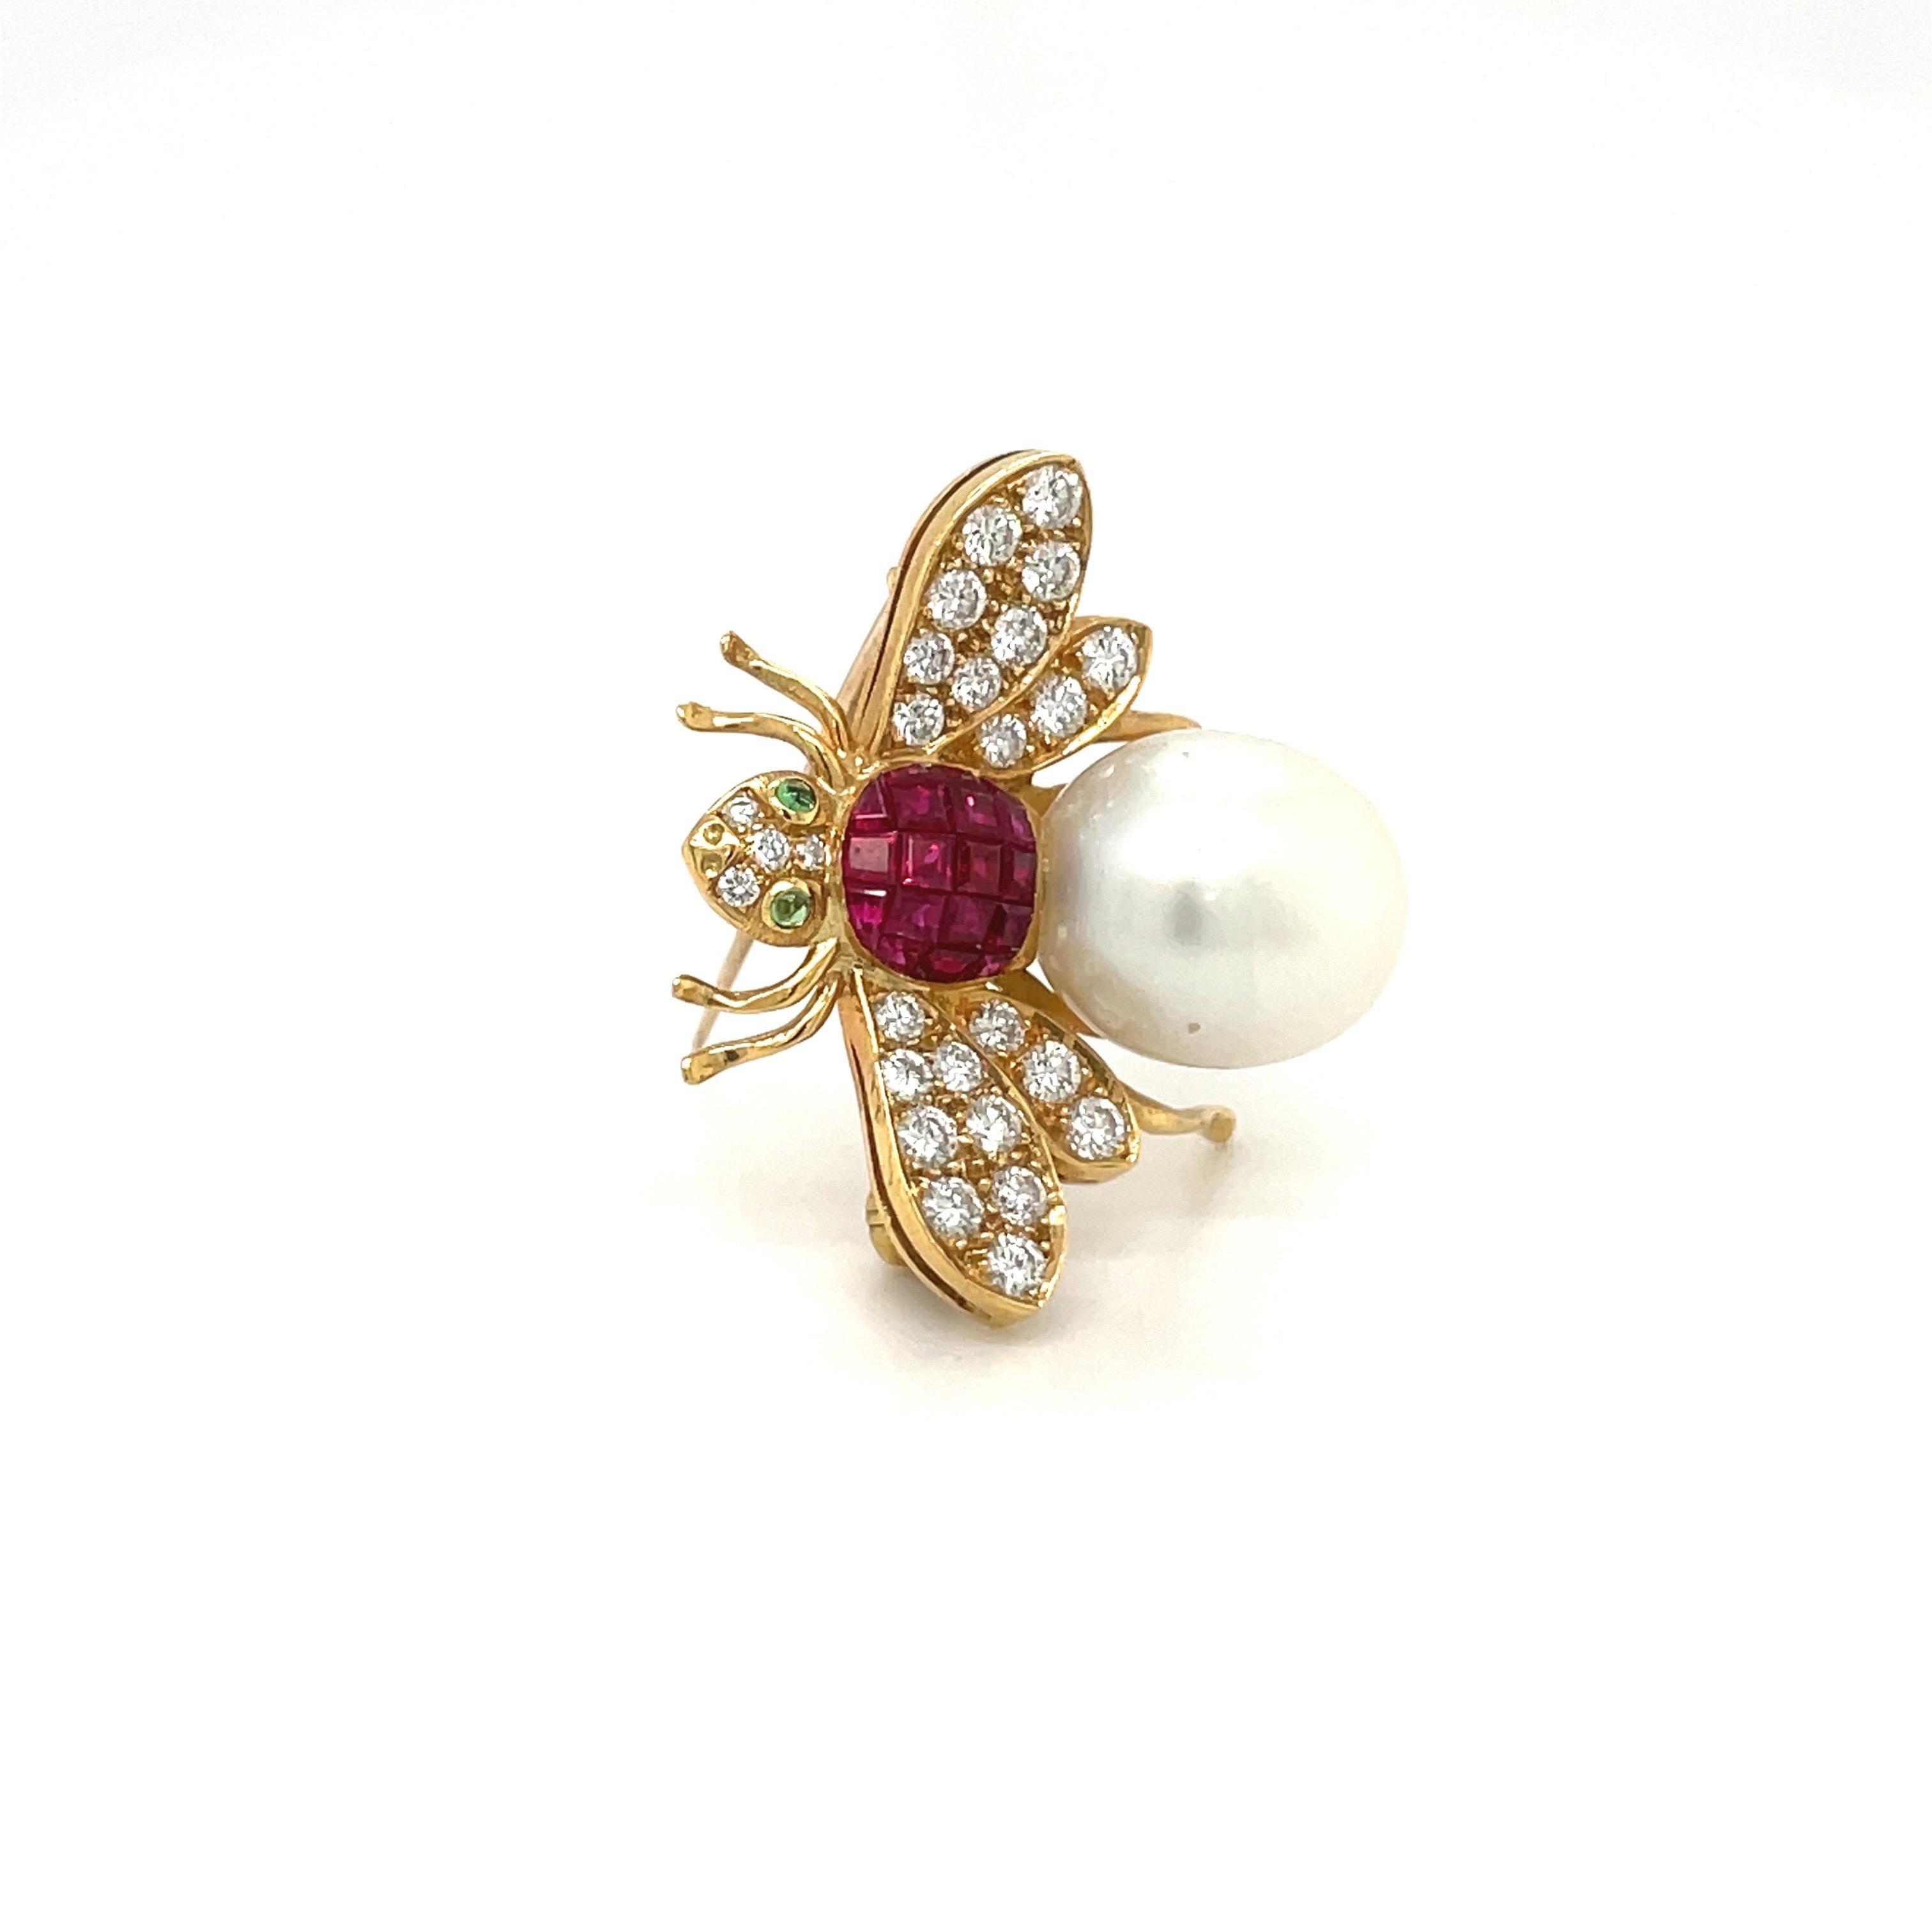 18 karat yellow gold bee brooch. This lovely brooch is beautifully designed with a body of invisibly set rubies and a South Sea pearl. The wings and head are composed of round brilliant diamonds. Two cabochon emeralds are set as the eyes. The bee